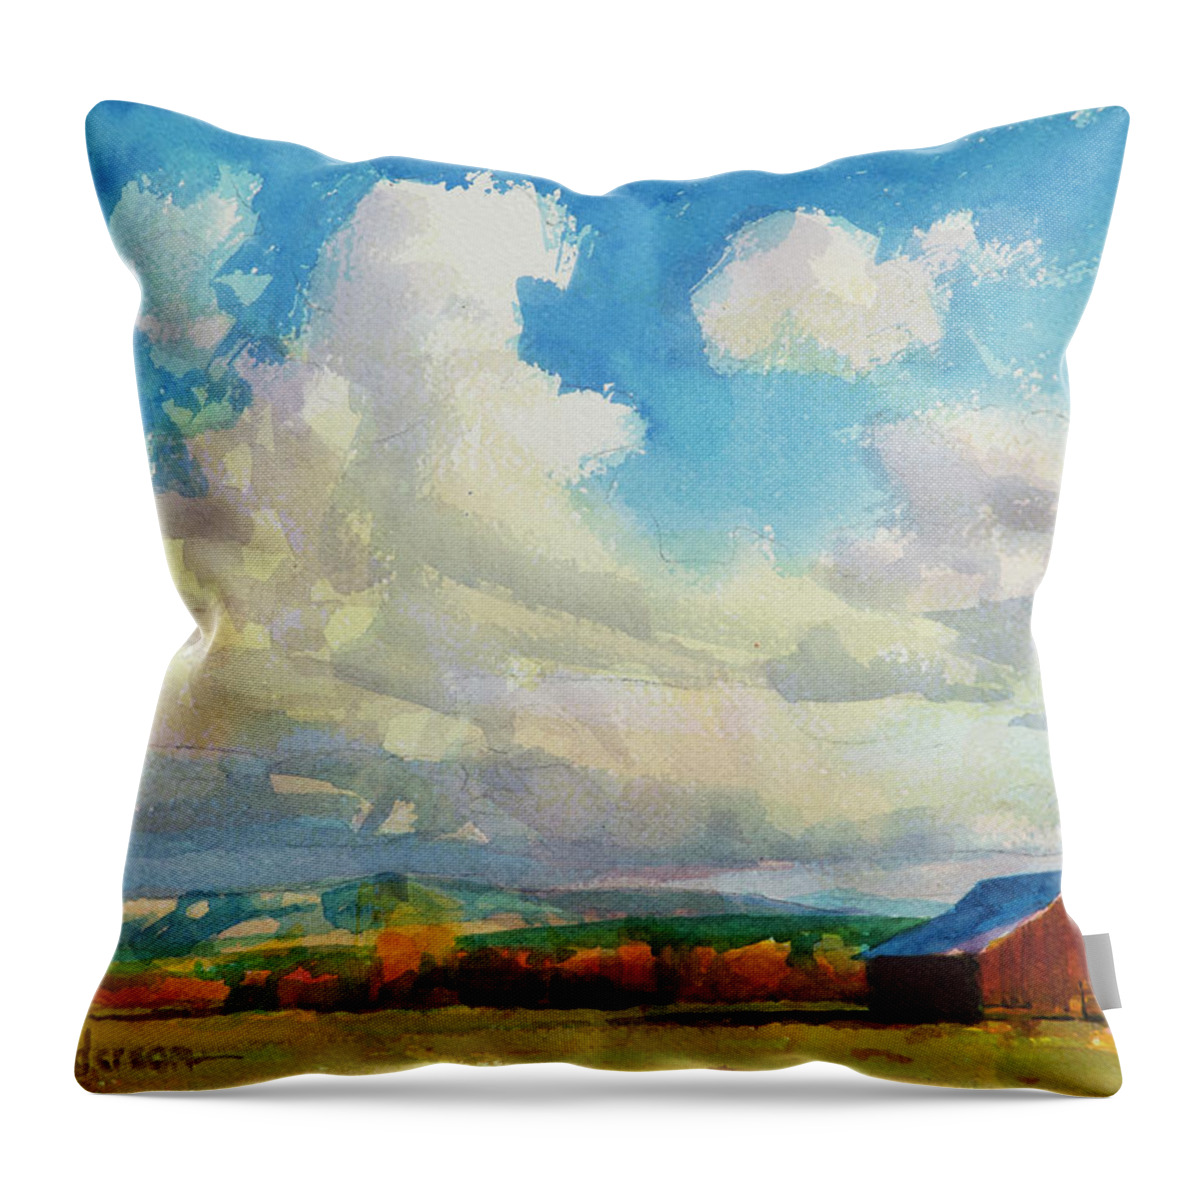 Country Throw Pillow featuring the painting Lonesome Barn by Steve Henderson